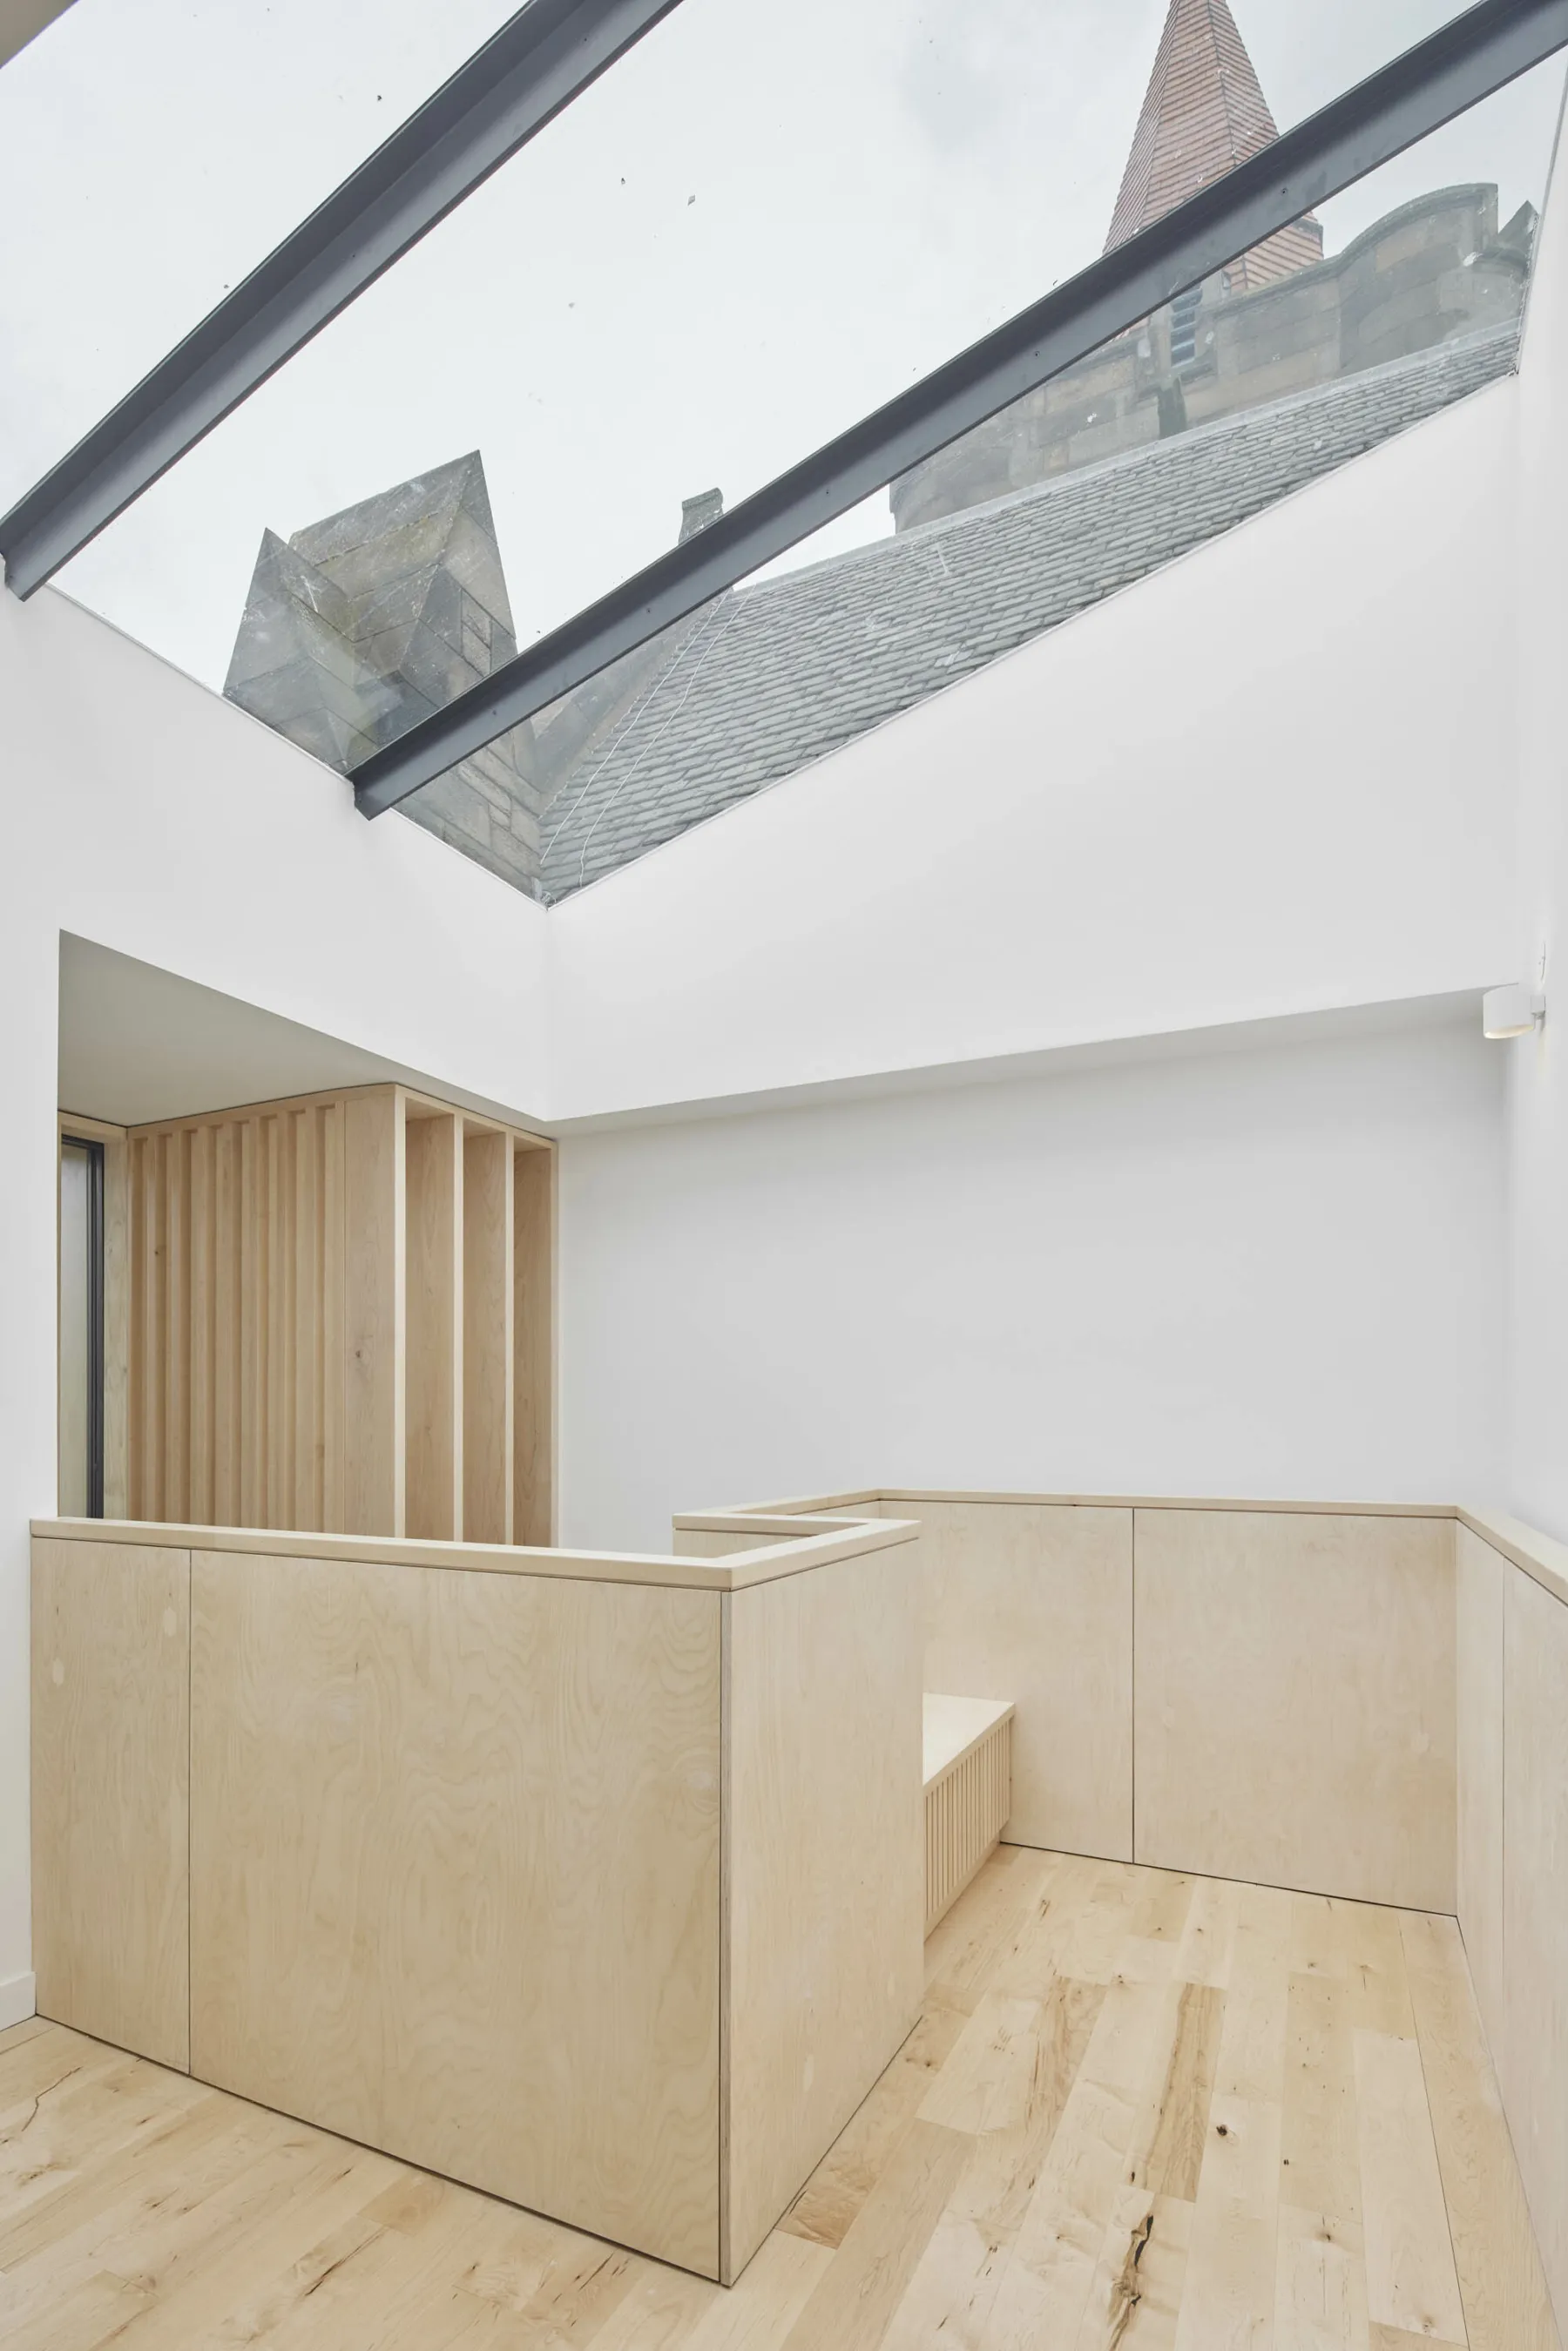 Large skylight at Greyfriars Charteris Centre, Edinburgh. Contemporary conversion of a church into a community centre. Wooden floors and pale wood solid bannister for the stair.